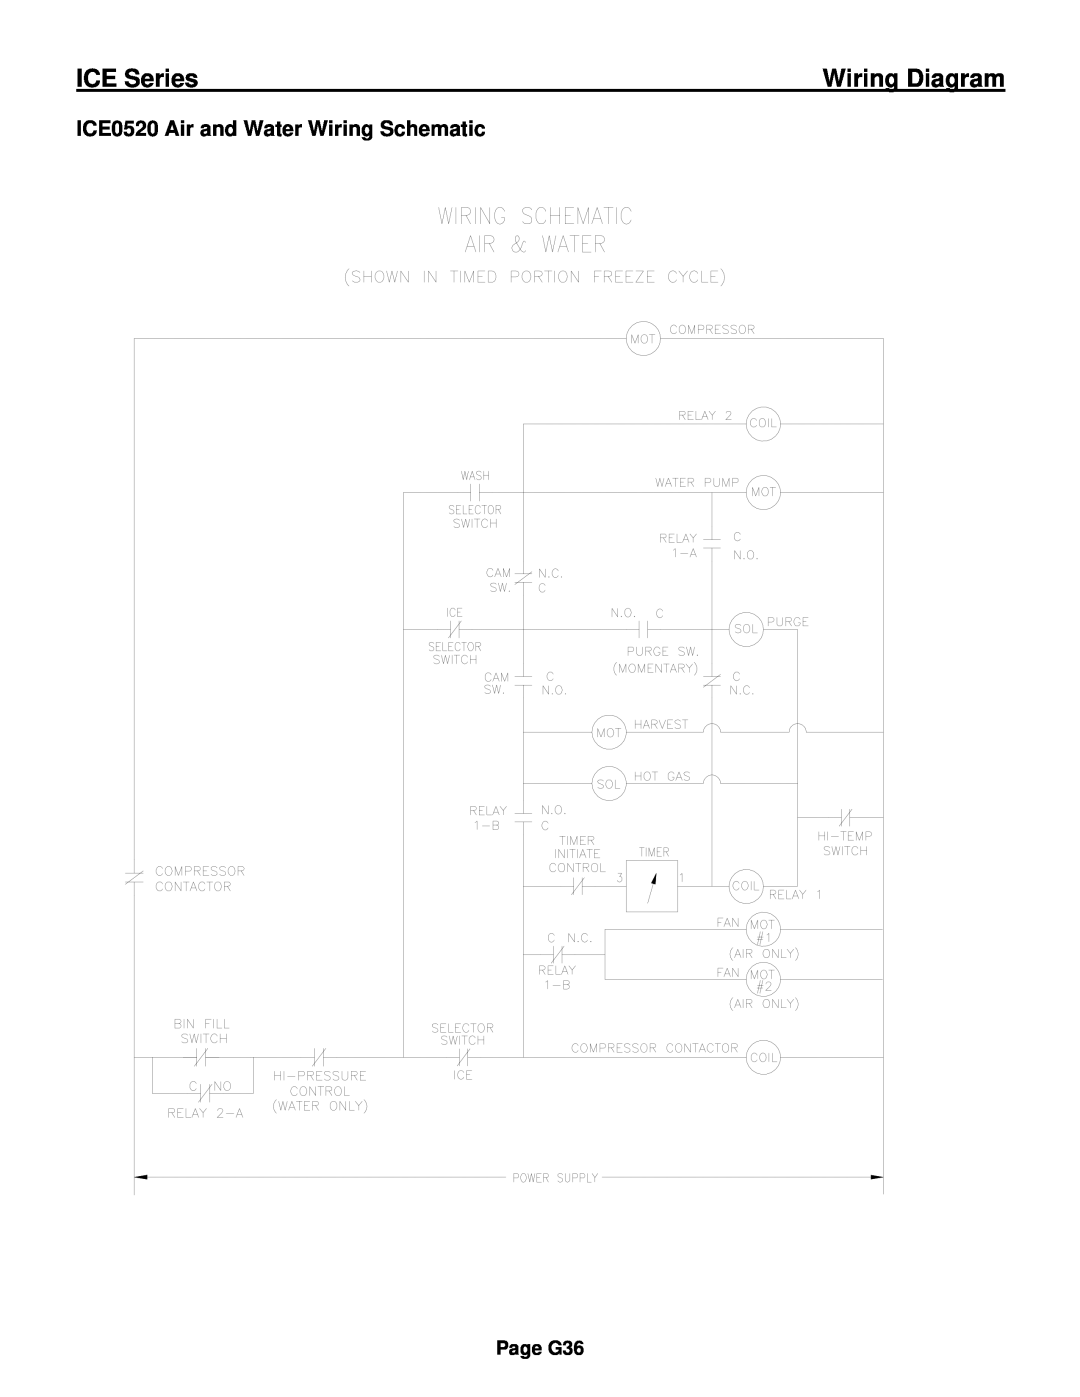 Ice-O-Matic ICE0250 Series installation manual ICE0520 Air and Water Wiring Schematic, ICE Series, Wiring Diagram, Page G36 